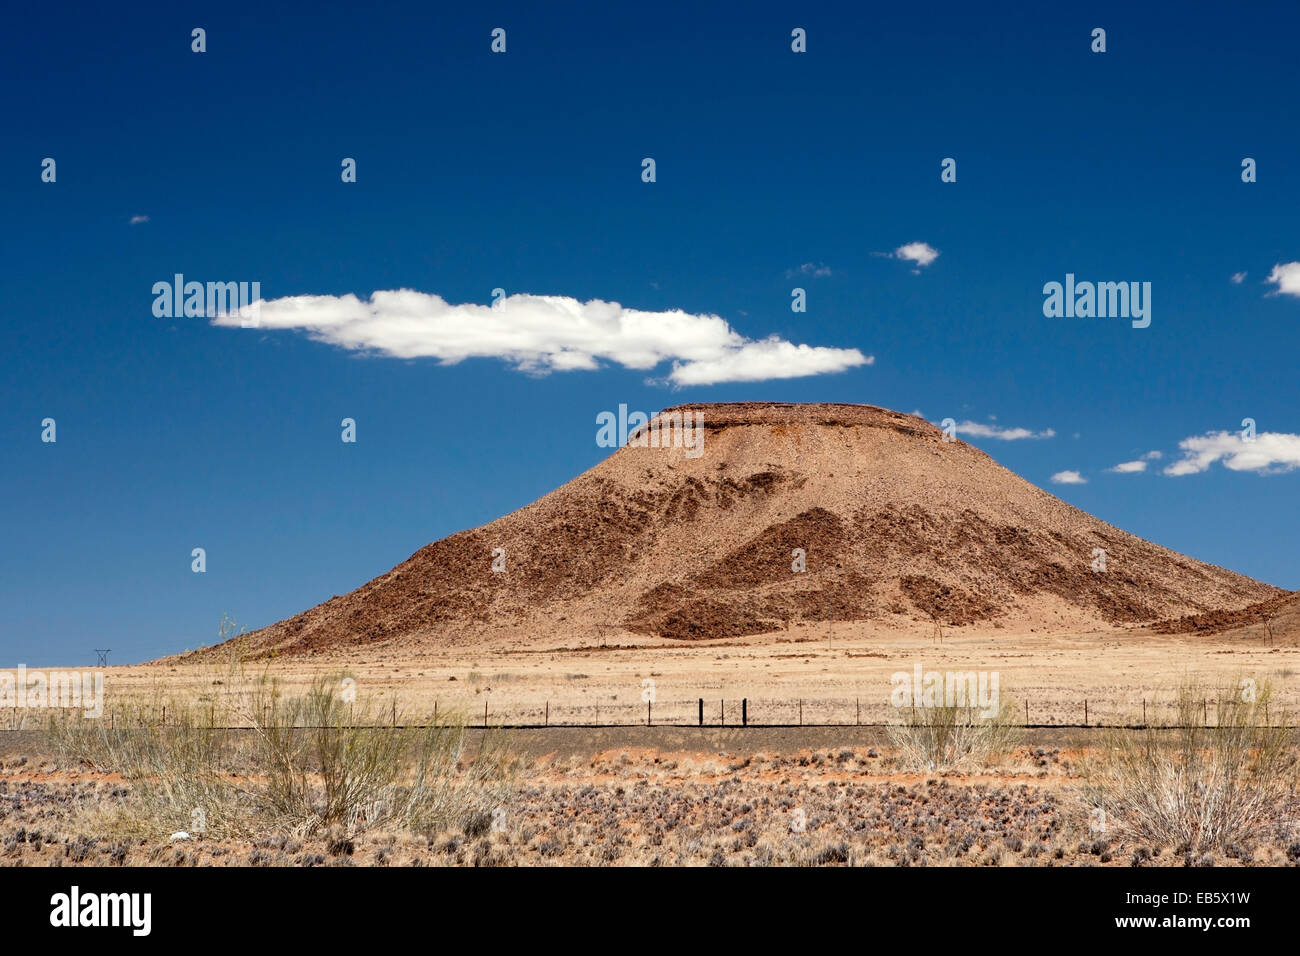 Mountain landscape on the Road to Keetmanshoop - Namibia, Africa Stock Photo